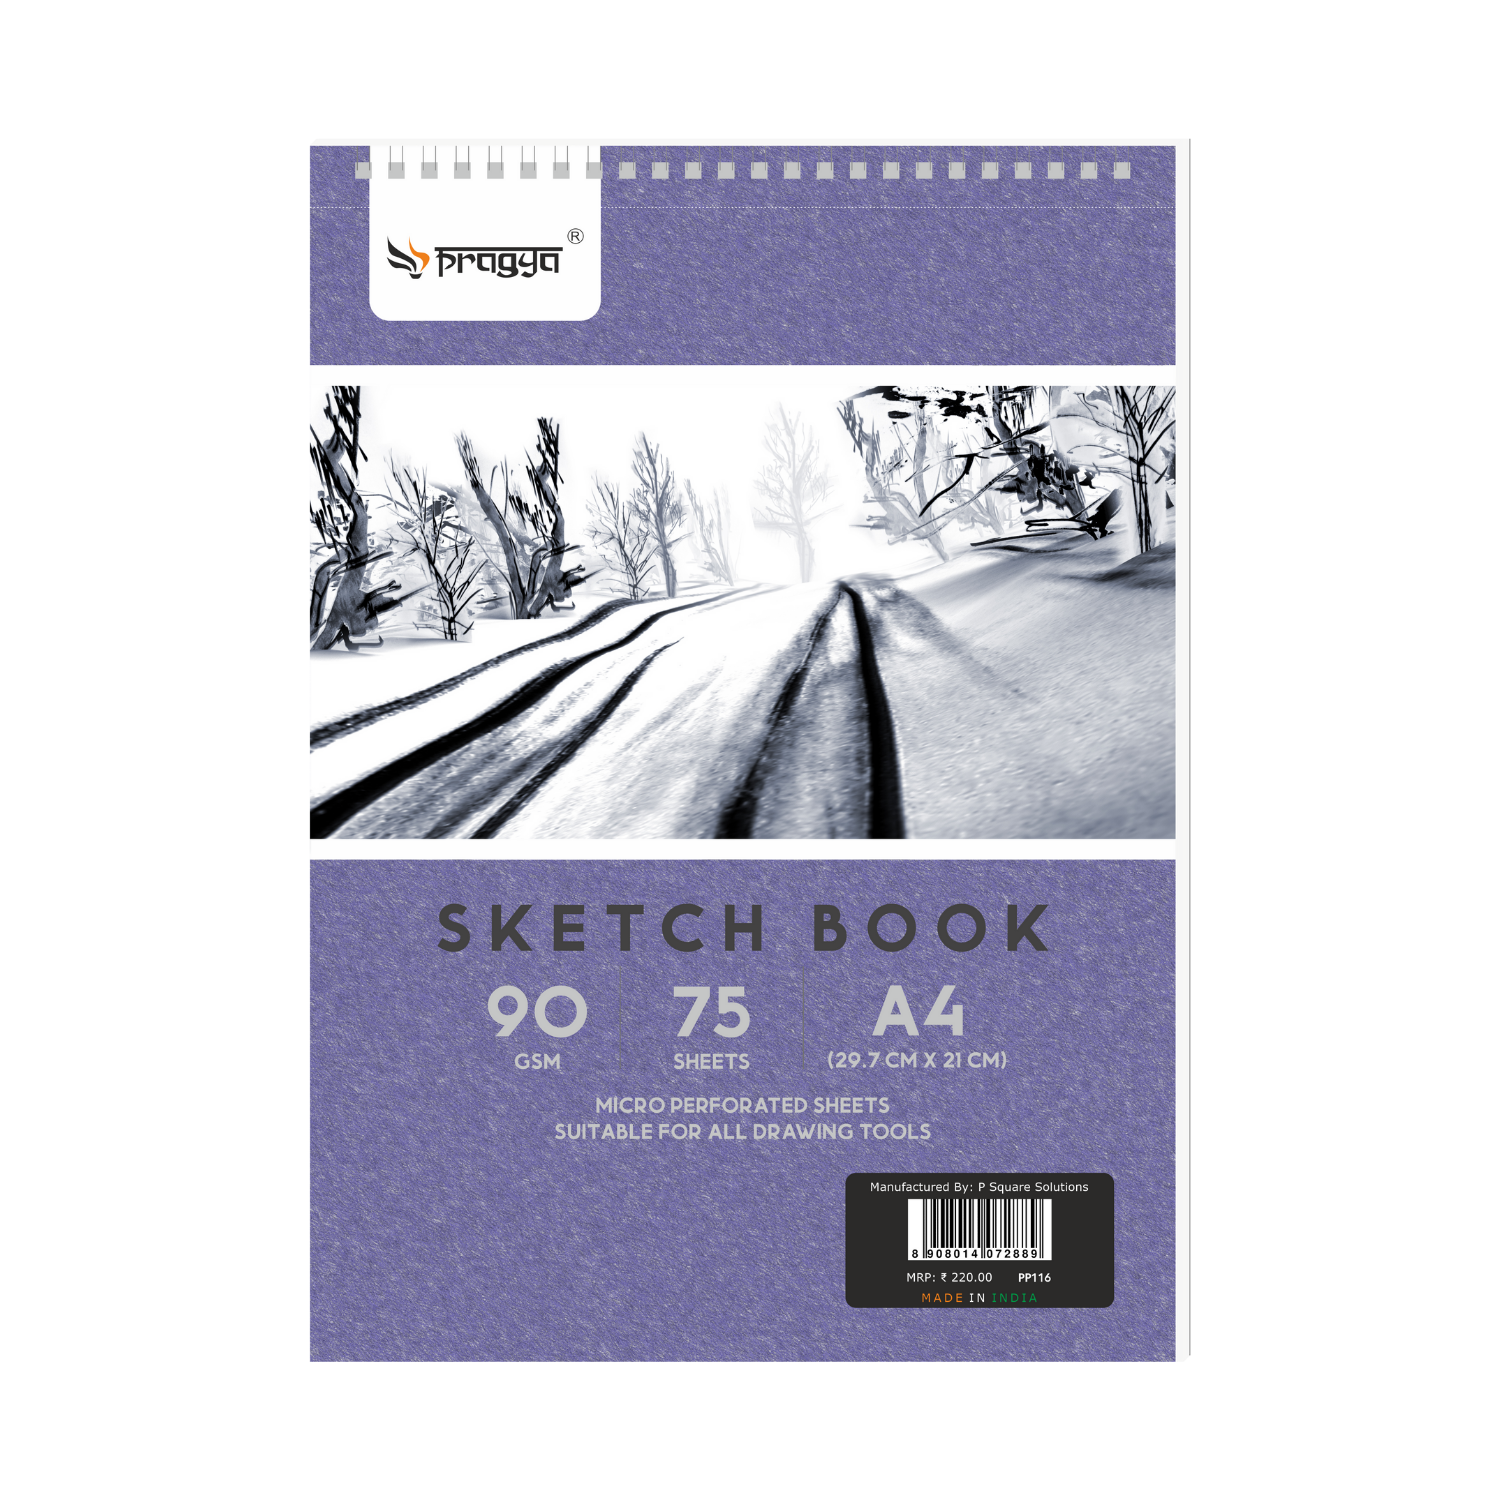 V.P AND SONS-Candid A2 Big Sketch Book - 50 Pages